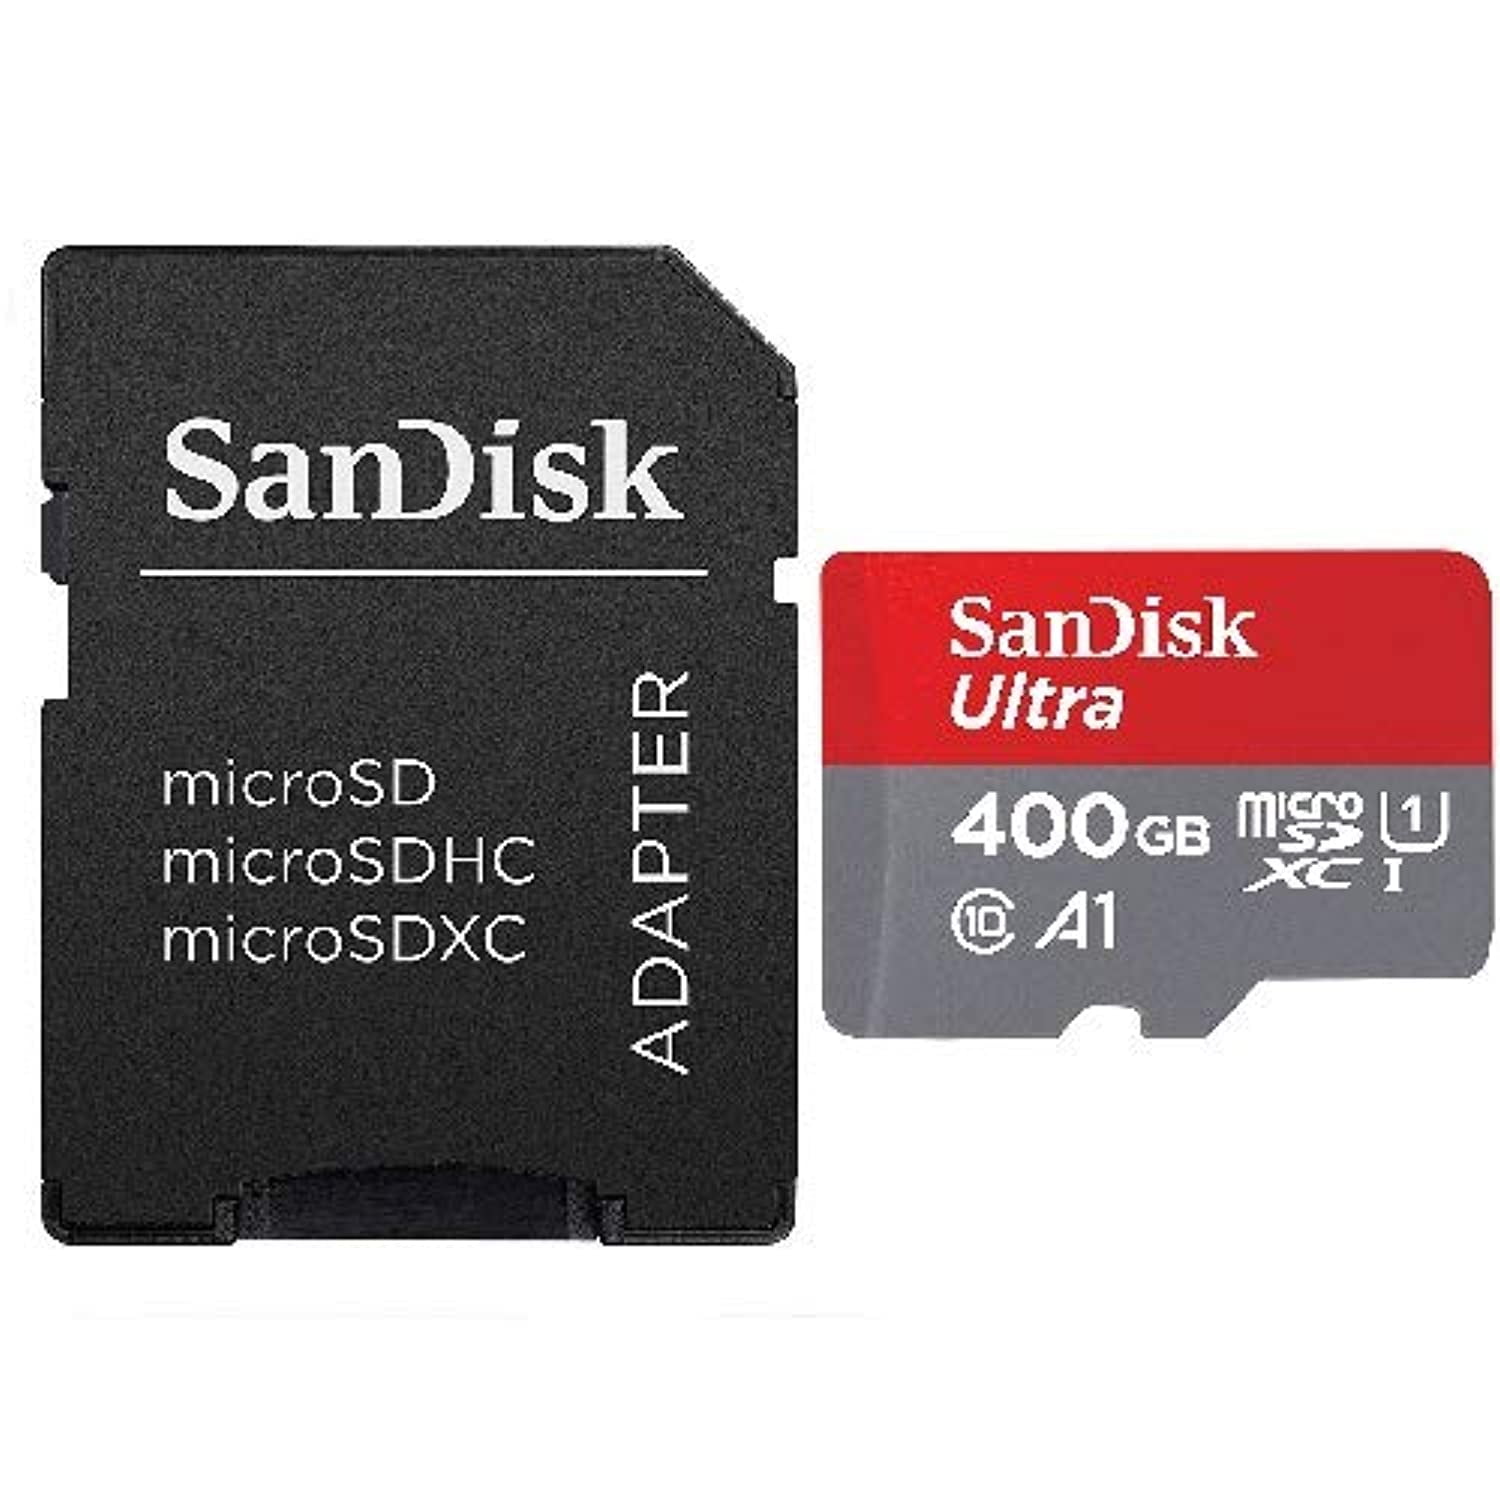 Sandisk 400gb Ultra Micro Sdxc Memory Card Works With Samsung Galaxy 18 18 Cell Phone Uhs I Class 10 Sdsquar 256g Gn6ma Bundle With Everything But Stromboli Card Reader Walmart Com Walmart Com